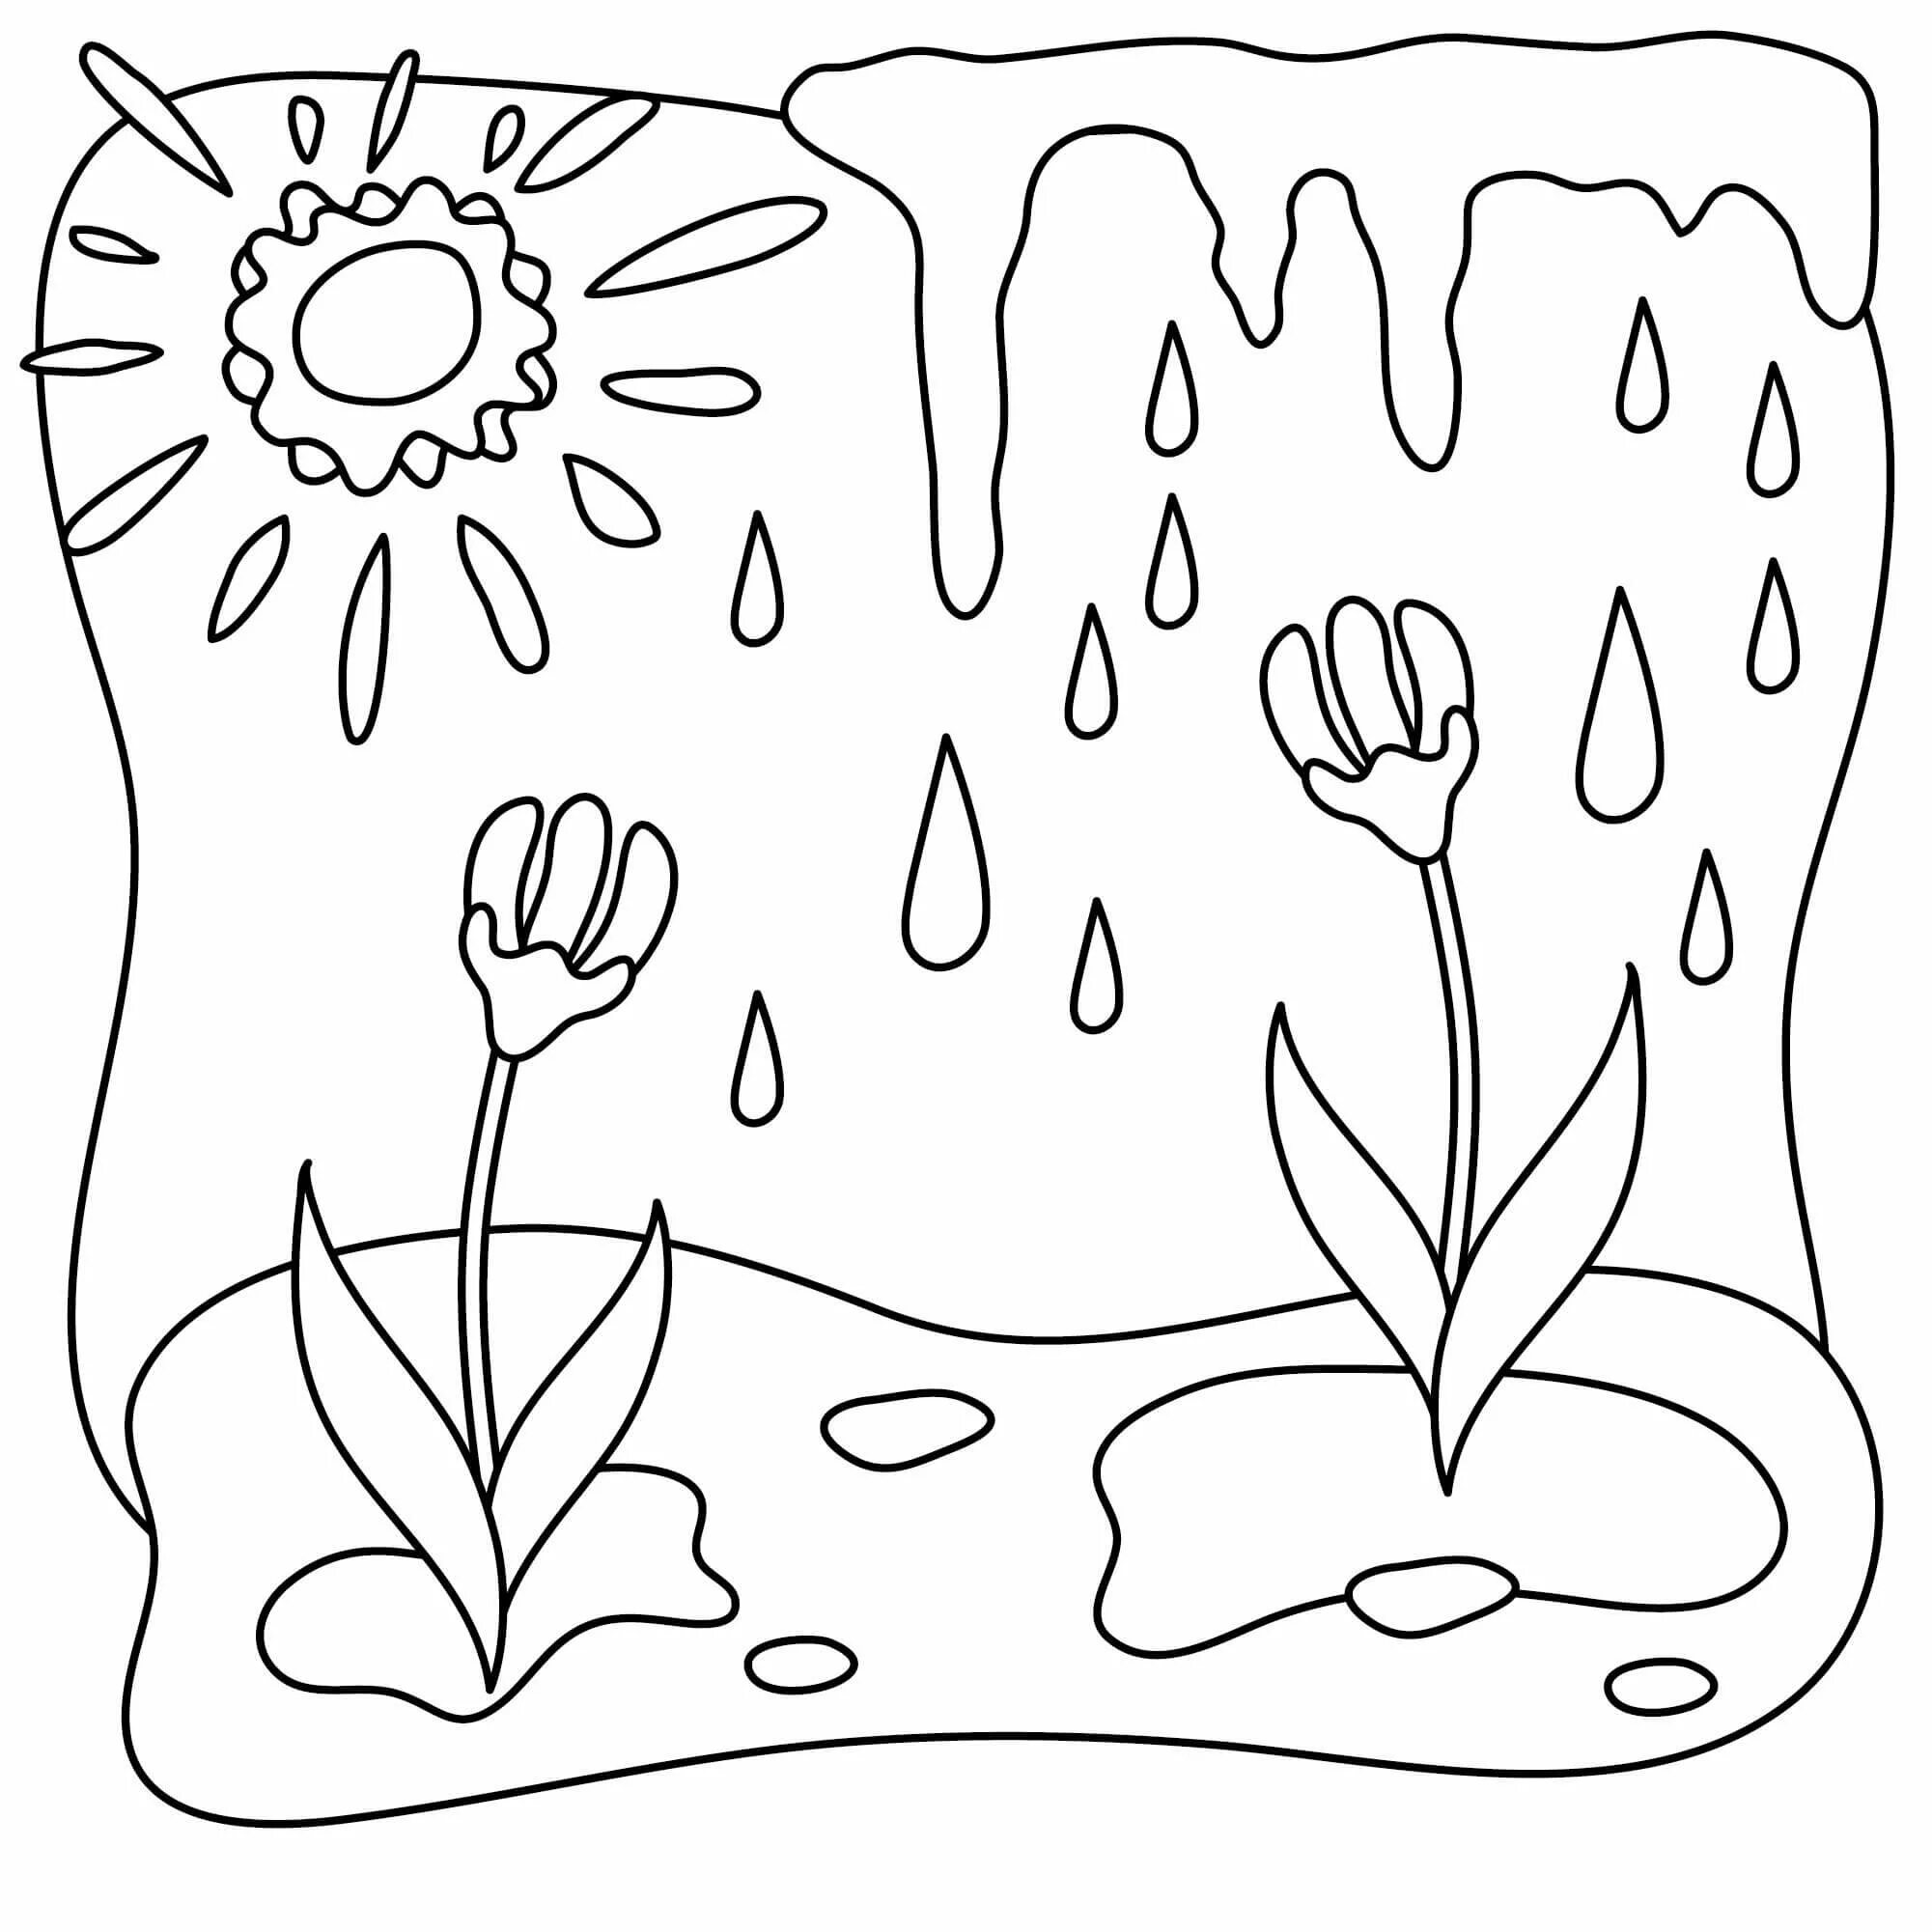 Coloring page cheerful spring has come